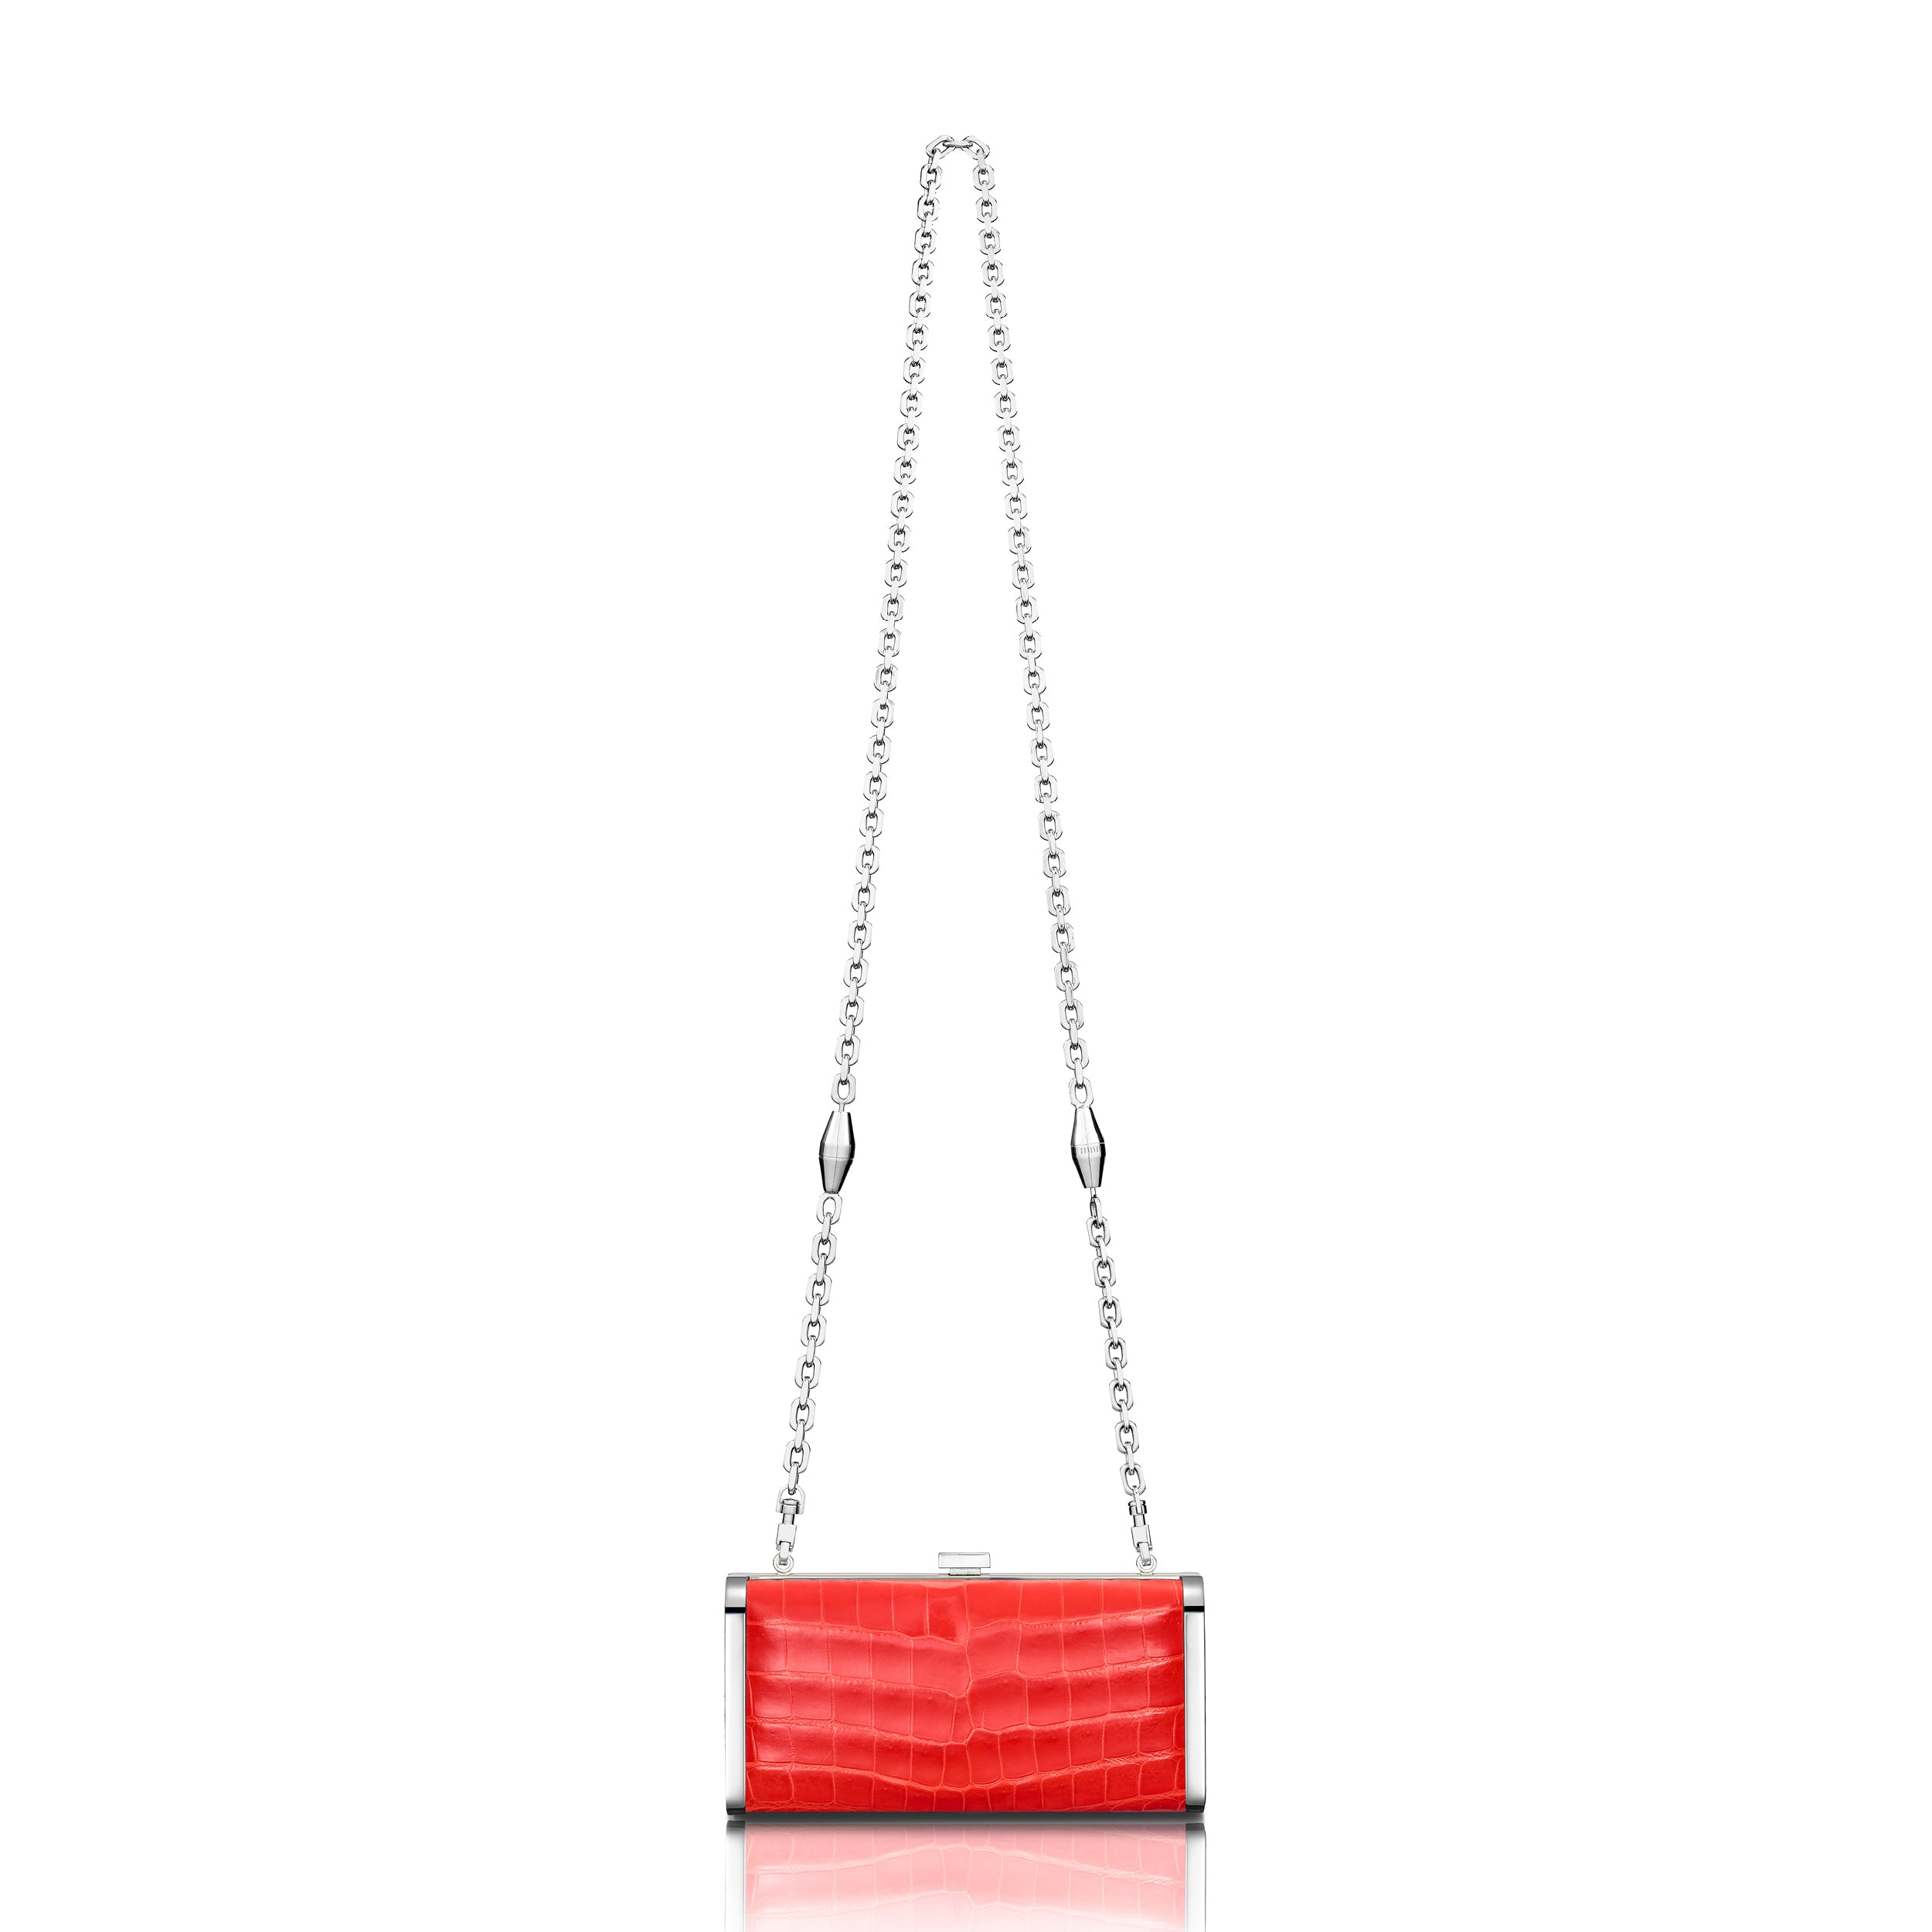 STALVEY Square Clutch in Neon Orange Alligator with Palladium Hardware Front View with Chain